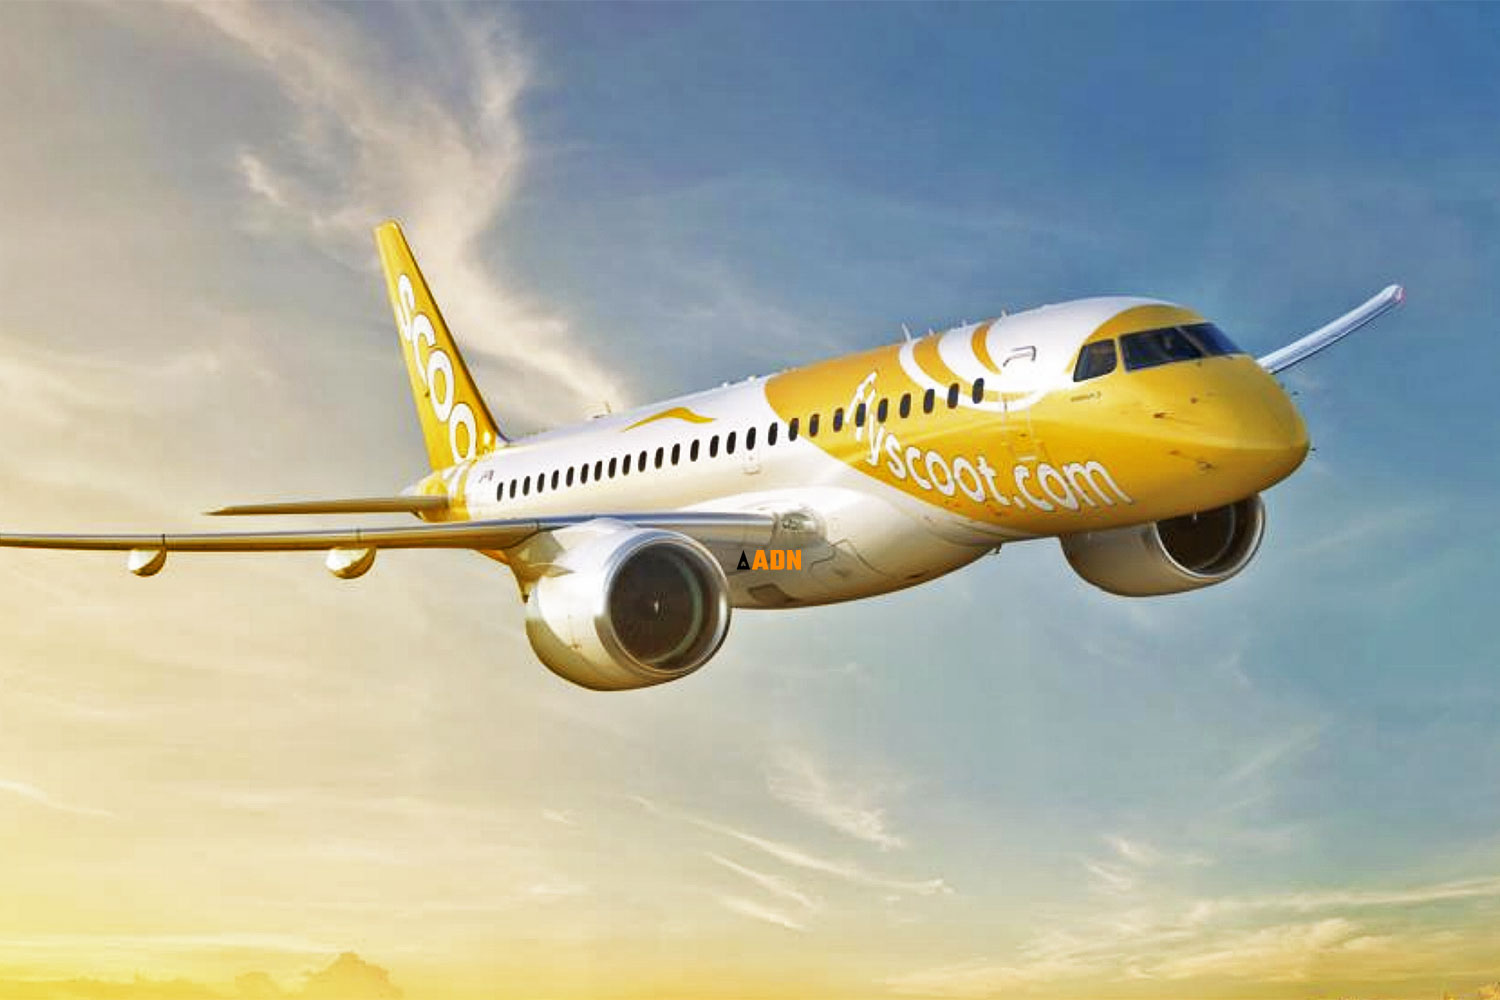 Scoot, a subsidiary Singapore Airlines, will lease E190-E2 jets Air Data